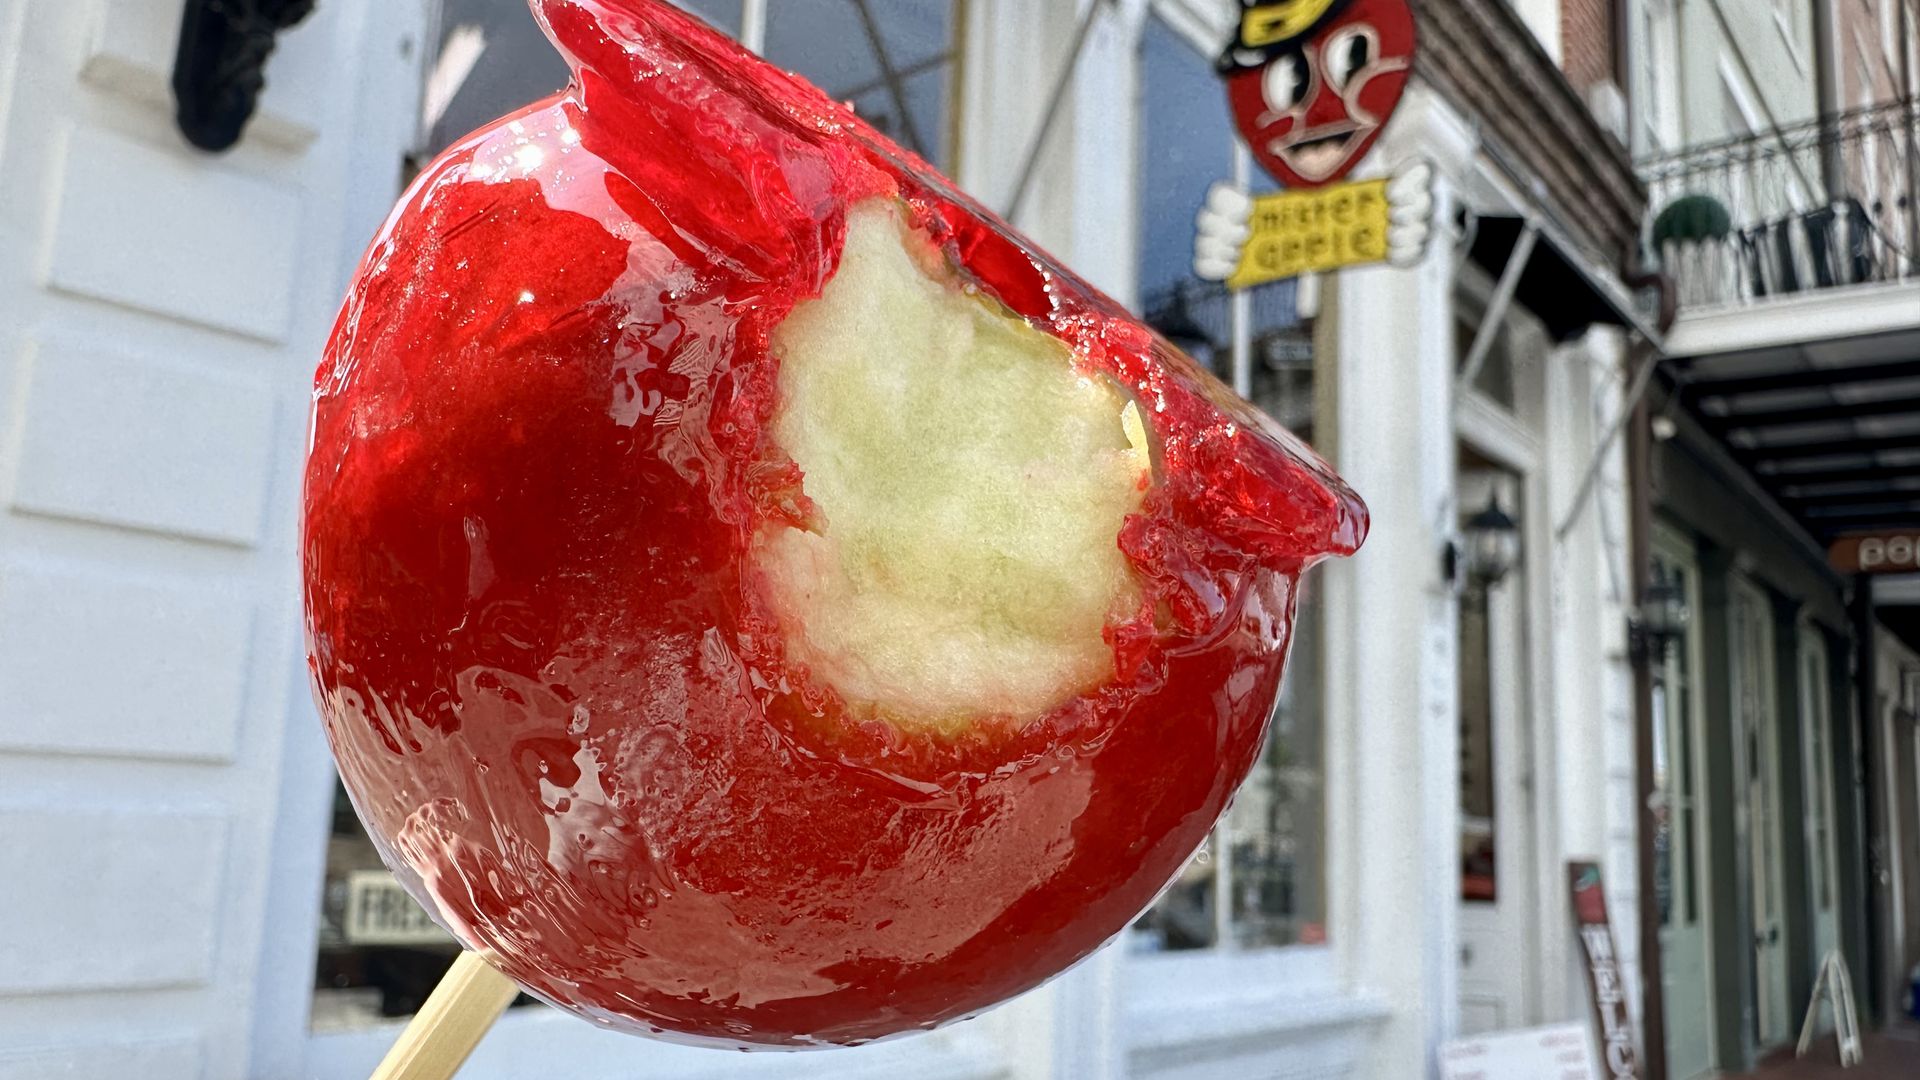 Photo shows a candy apple from Mister Apple